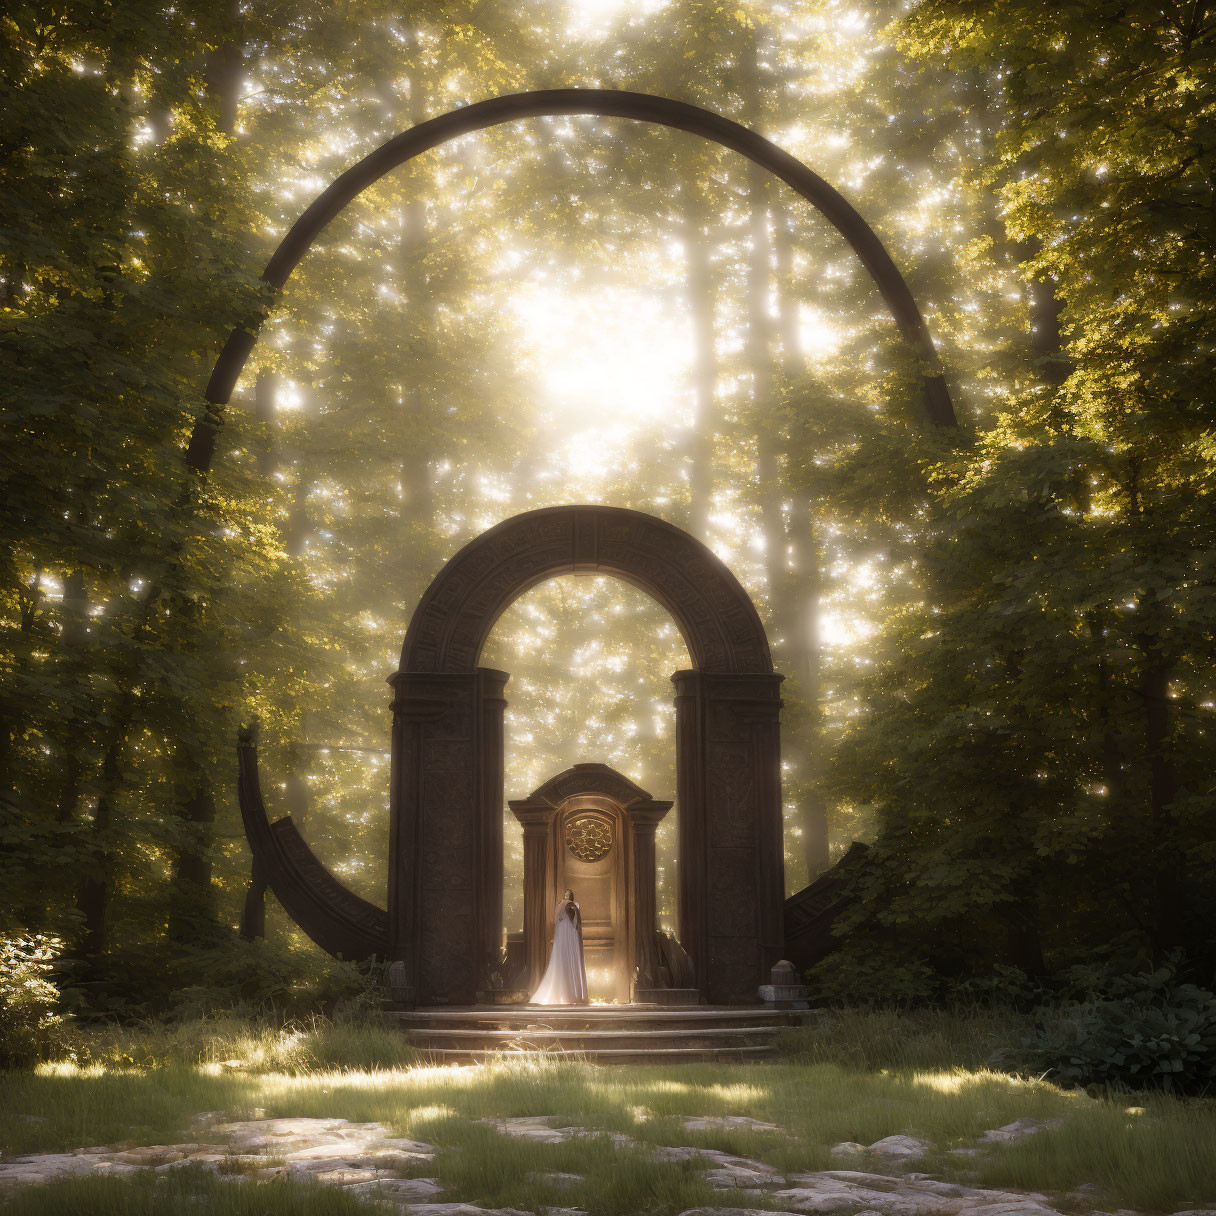 Mystical archway in sunlit forest with robed figure